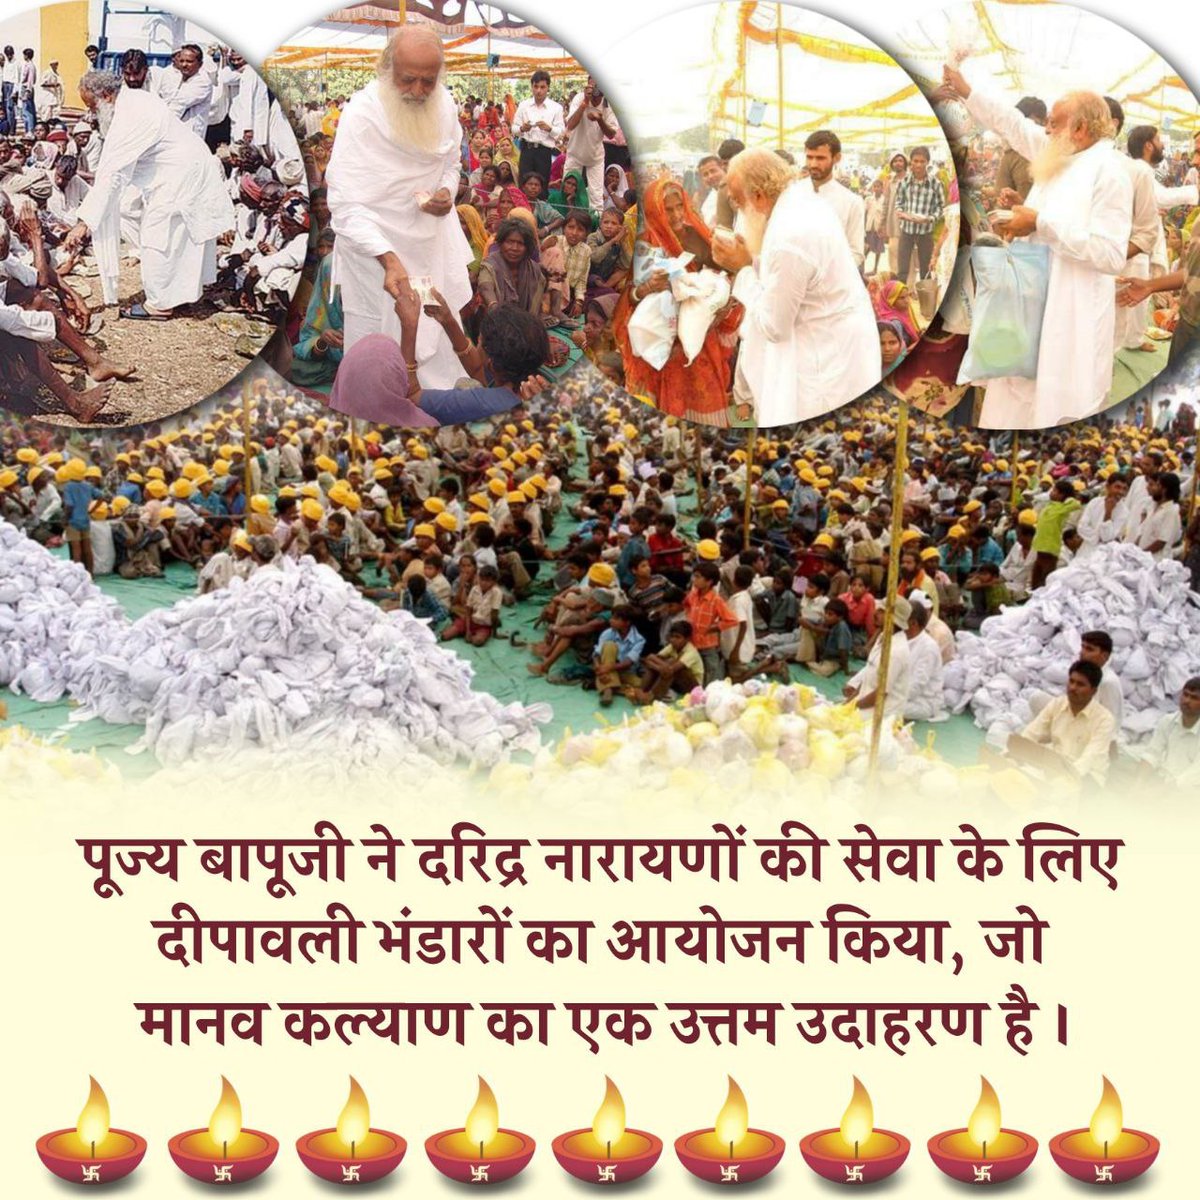 Inspired by Sant Shri Asharamji Bapu, distribution of grains, clothes, utensils, and notebooks with sweets for needy children is done. Services like community kitchens and kirtans in impoverished areas are a regular part.
Inspirational for Society
#प्राणिमात्र_के_हितैषी